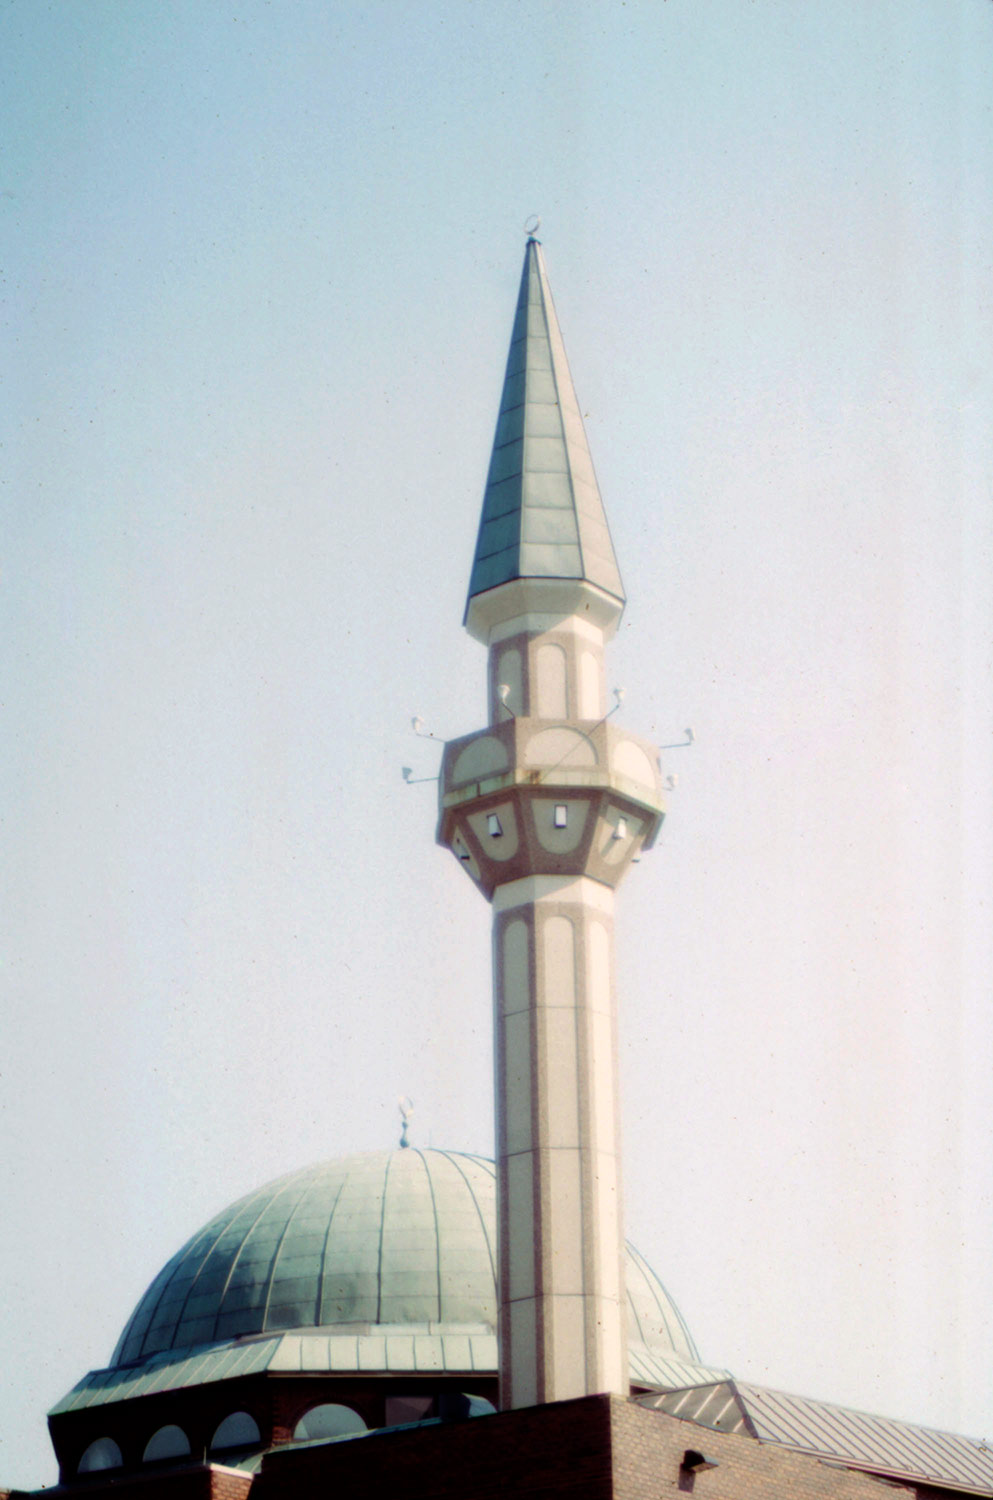 Ottawa Mosque - Exterior detail of the dome and minaret